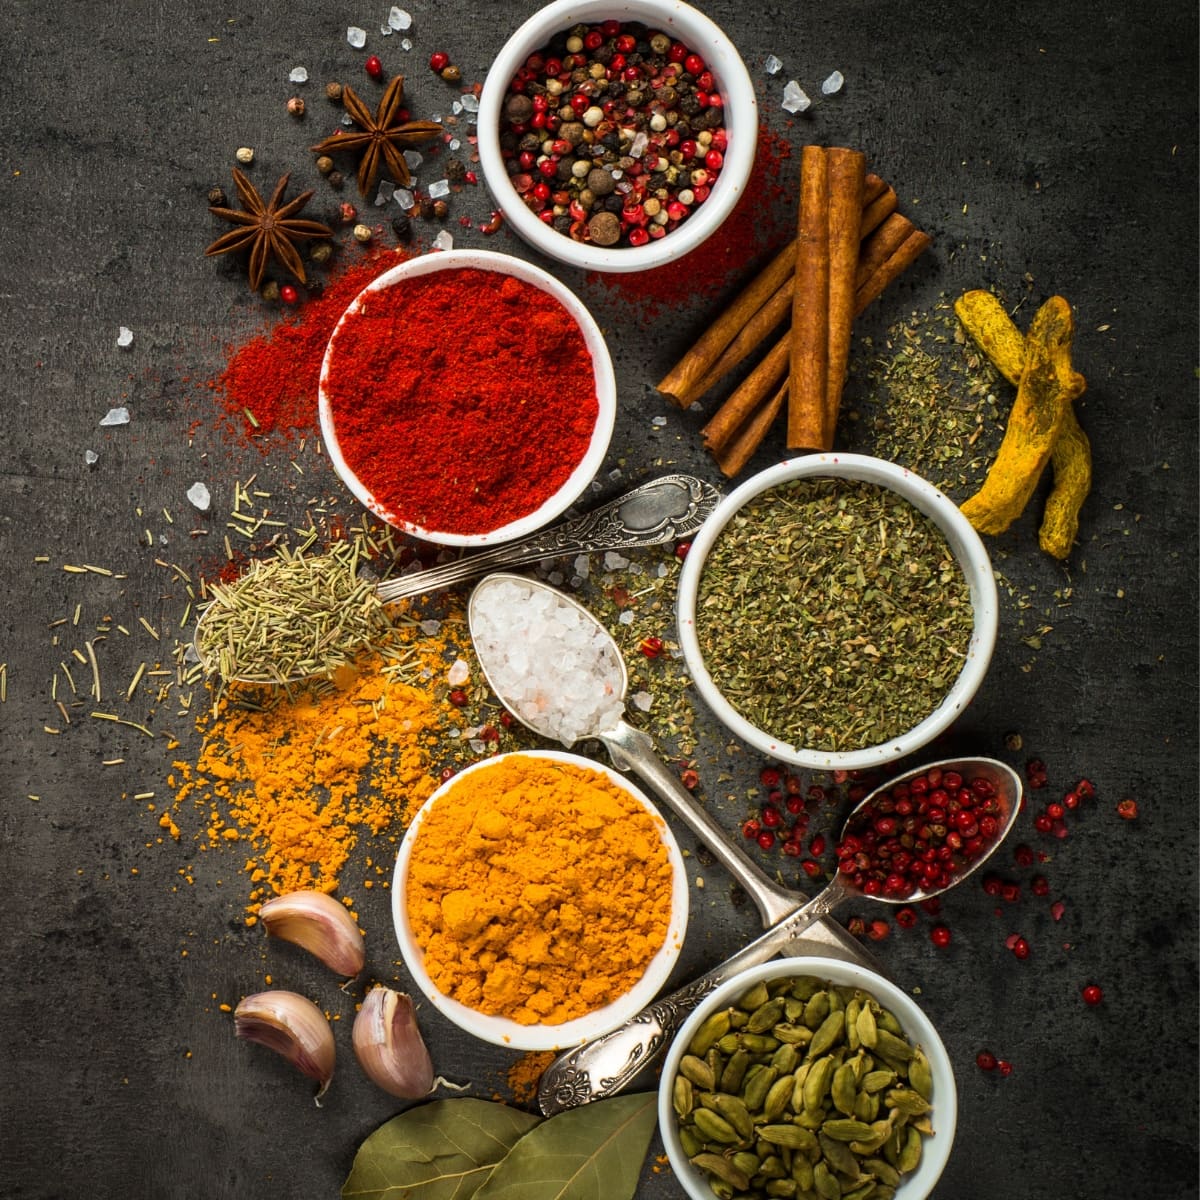 https://insanelygoodrecipes.com/wp-content/uploads/2023/10/Various-Spices-and-Herbs-in-Bowls-Over-a-Dark-Background.jpg